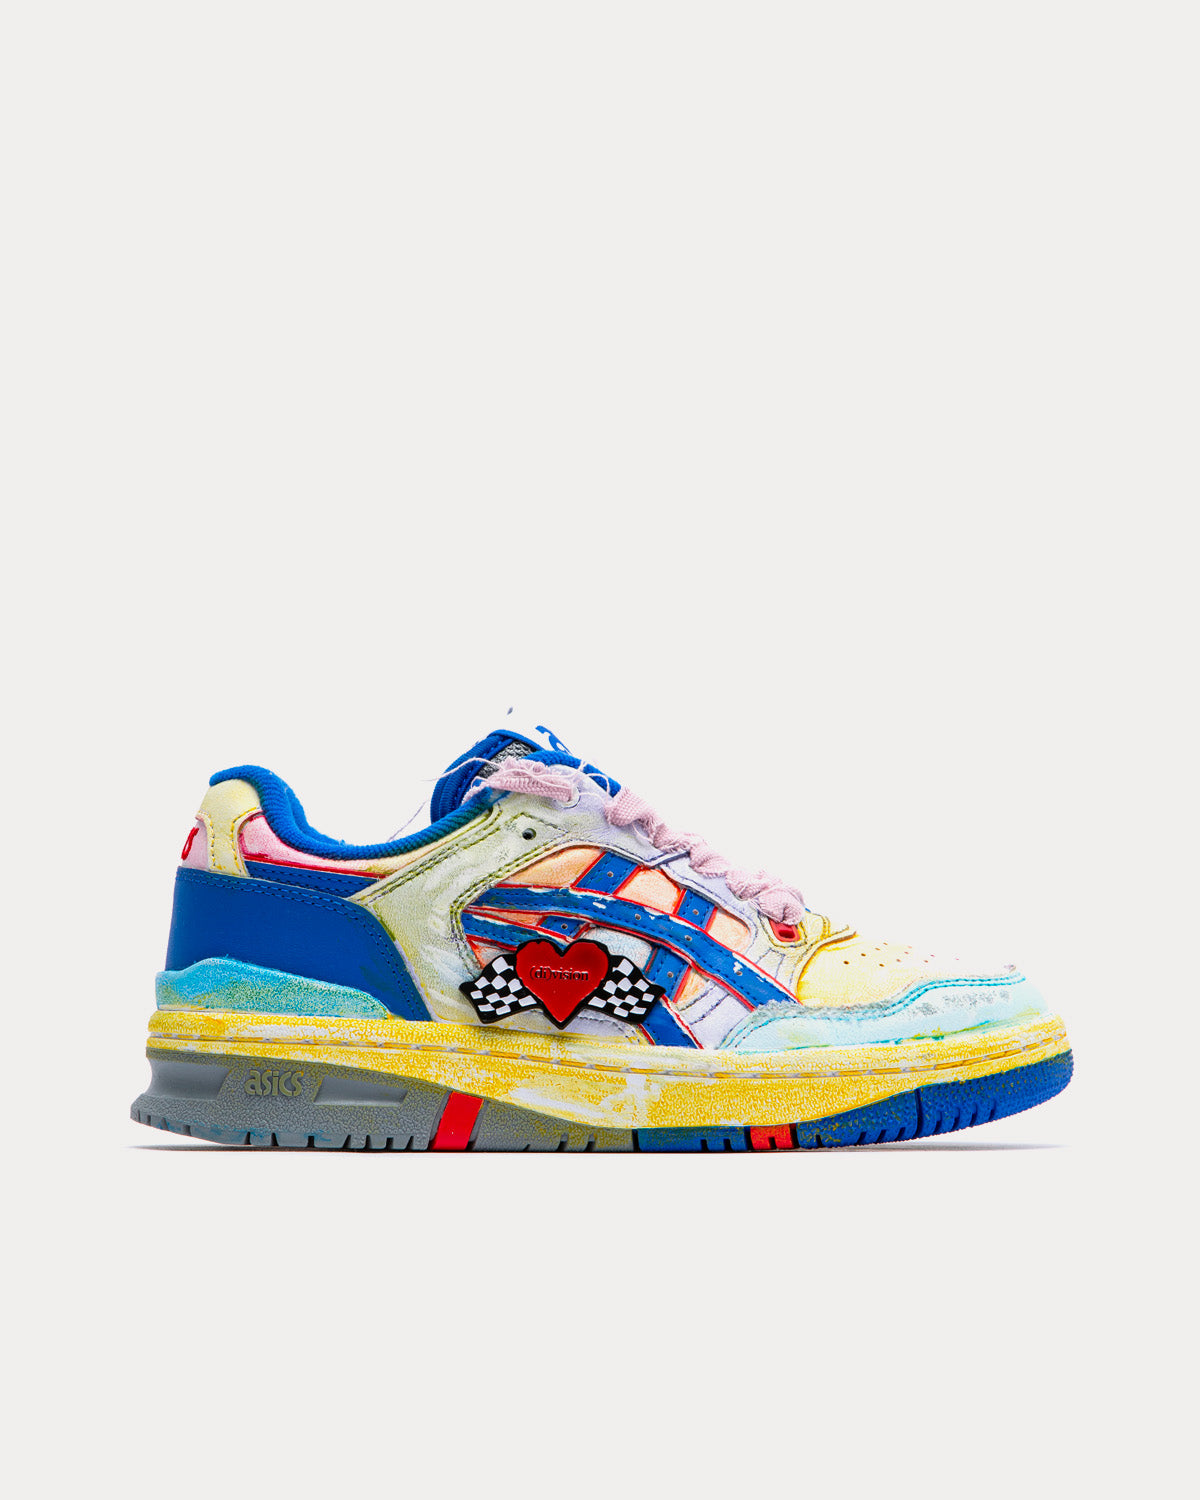 Asics x (di)vision - EX89 Rainbow / Pink / Blue Low Top Sneakers